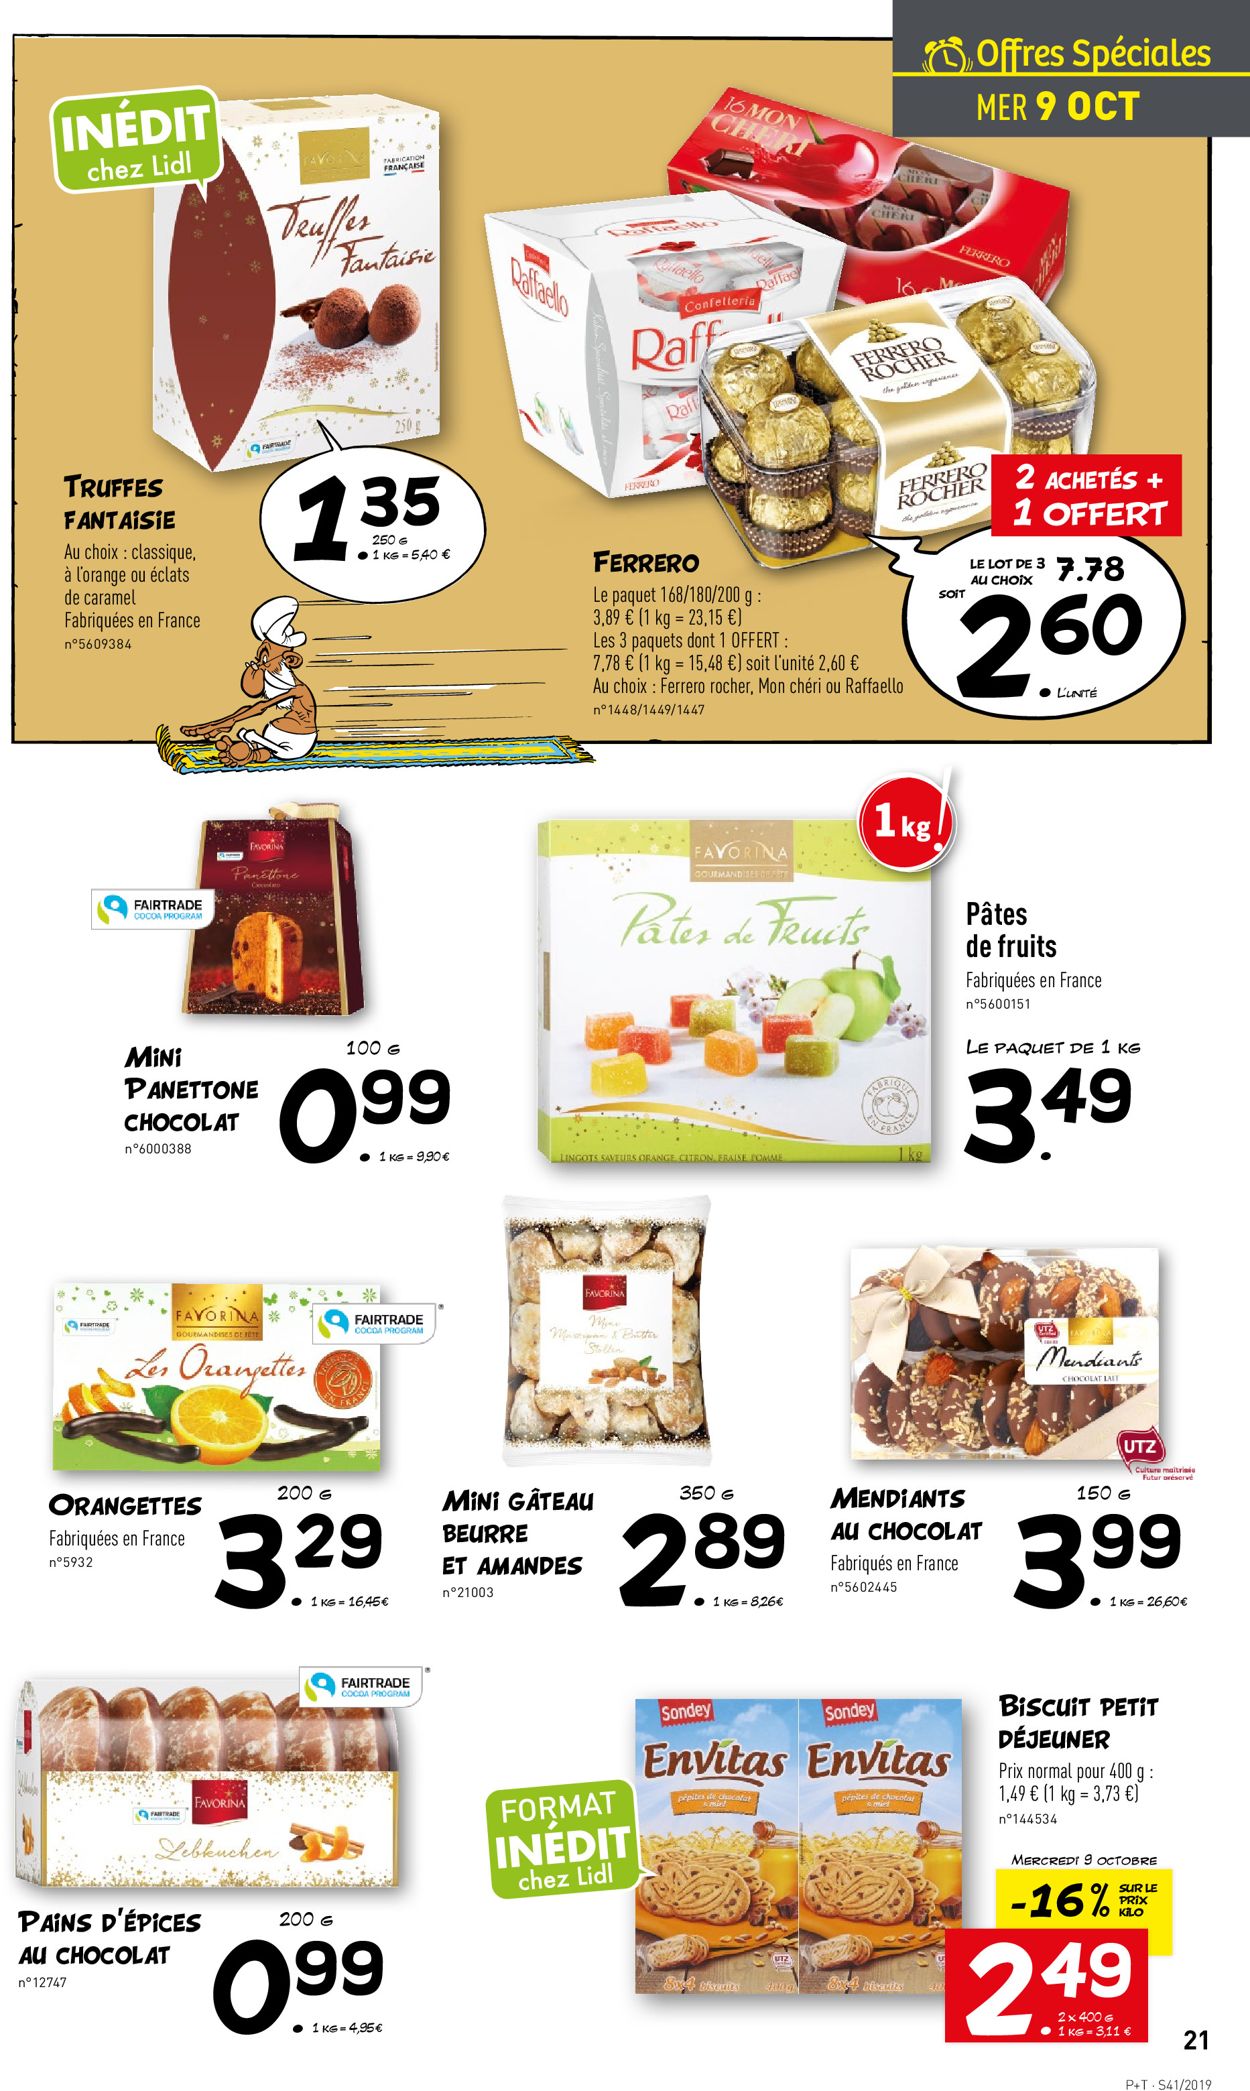 Lidl Catalogue - 09.10-15.10.2019 (Page 21)